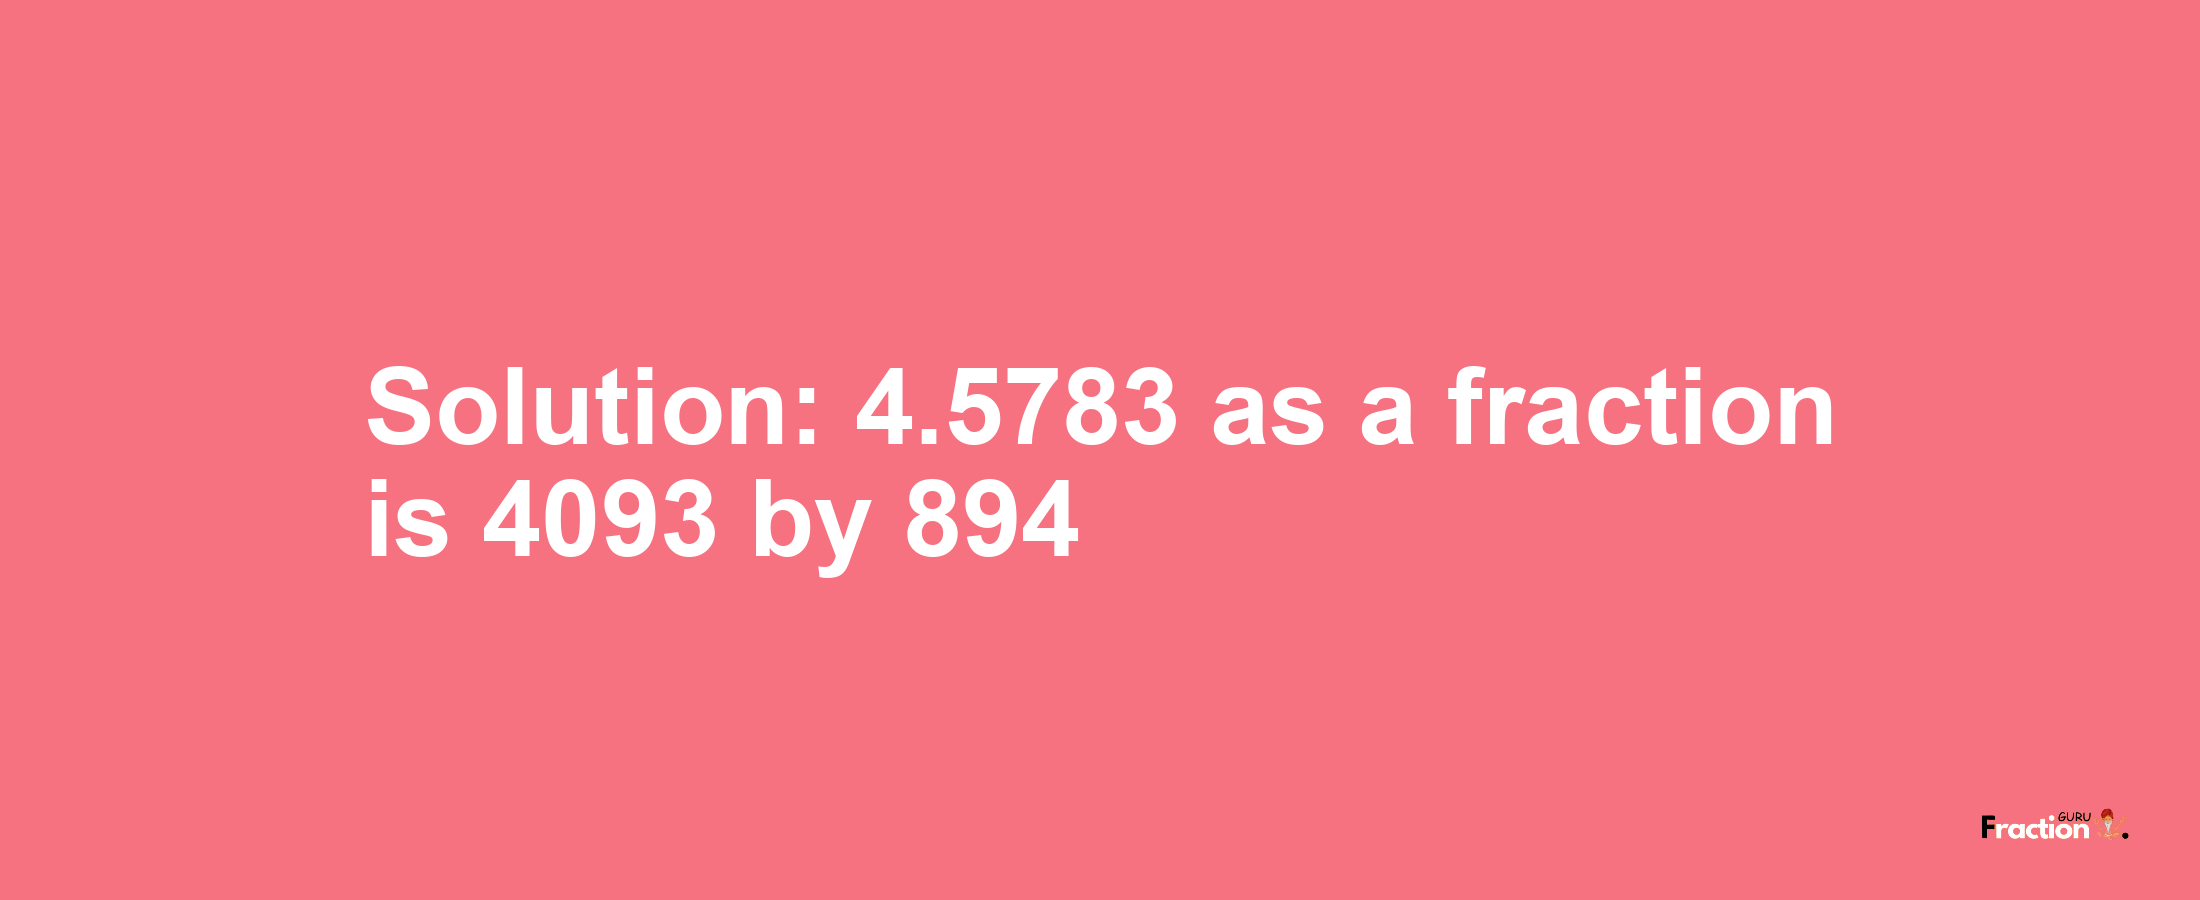 Solution:4.5783 as a fraction is 4093/894